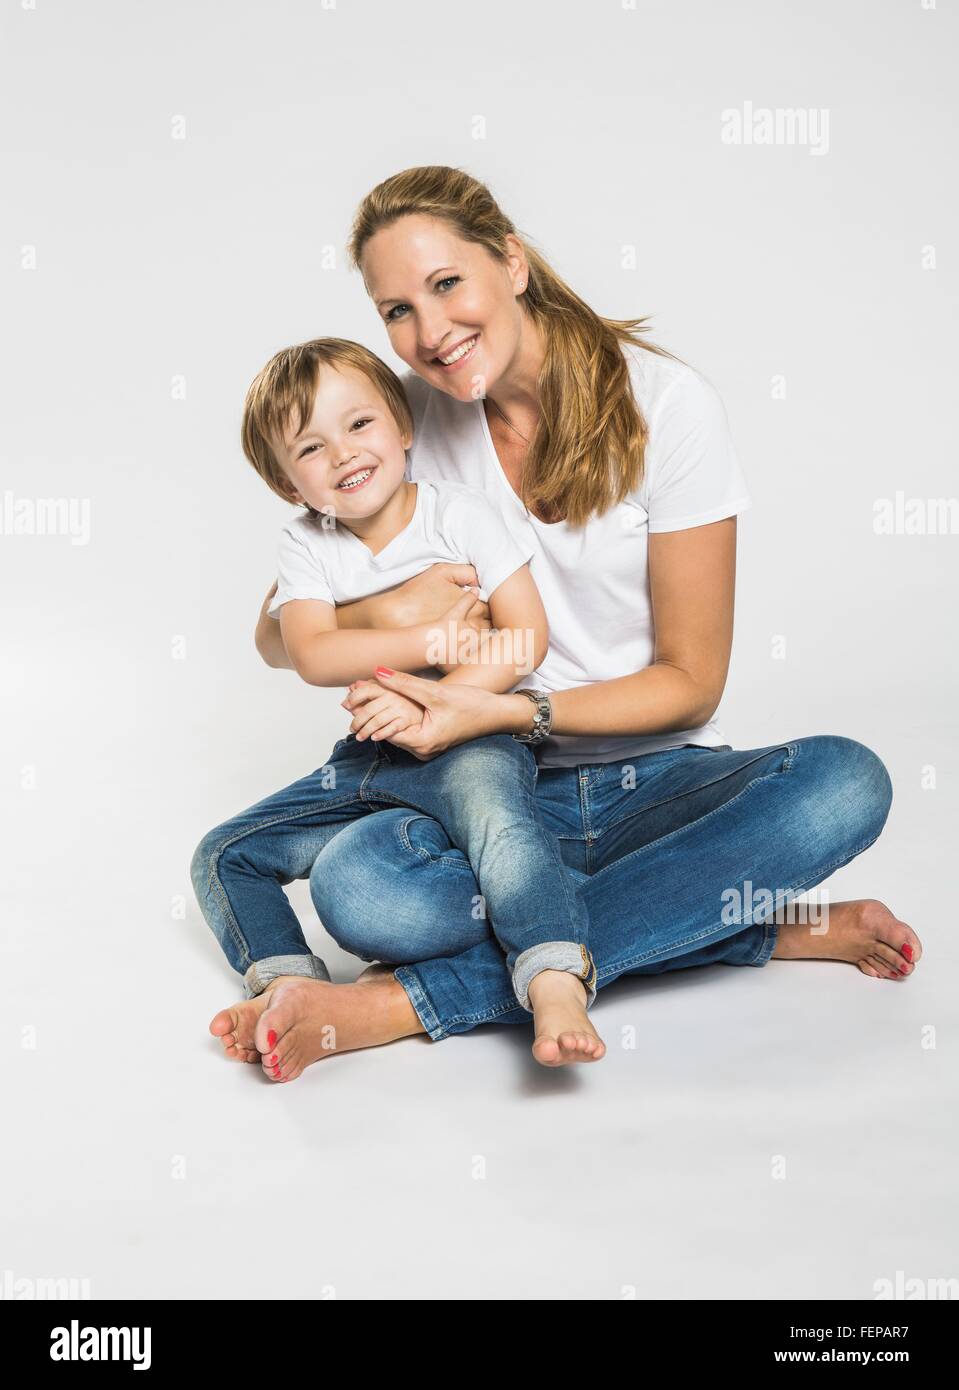 Studio portrait of mid adult woman sitting on floor with son Stock Photo